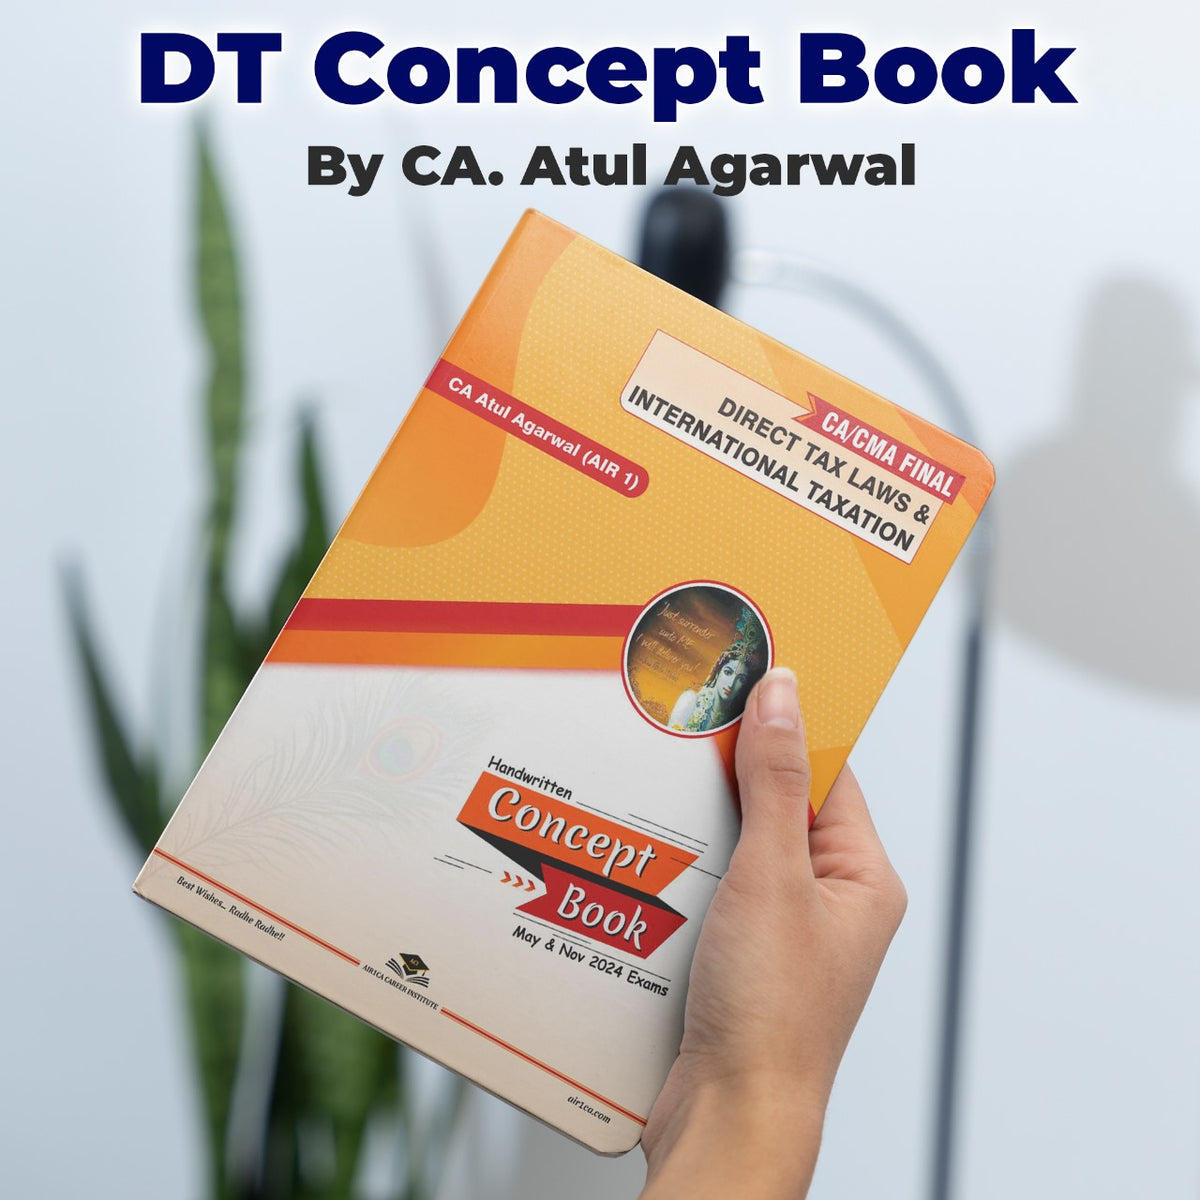 AIR1CA DT Concept Book for May 24 & Nov. 24 - By CA. Atul Agarwal